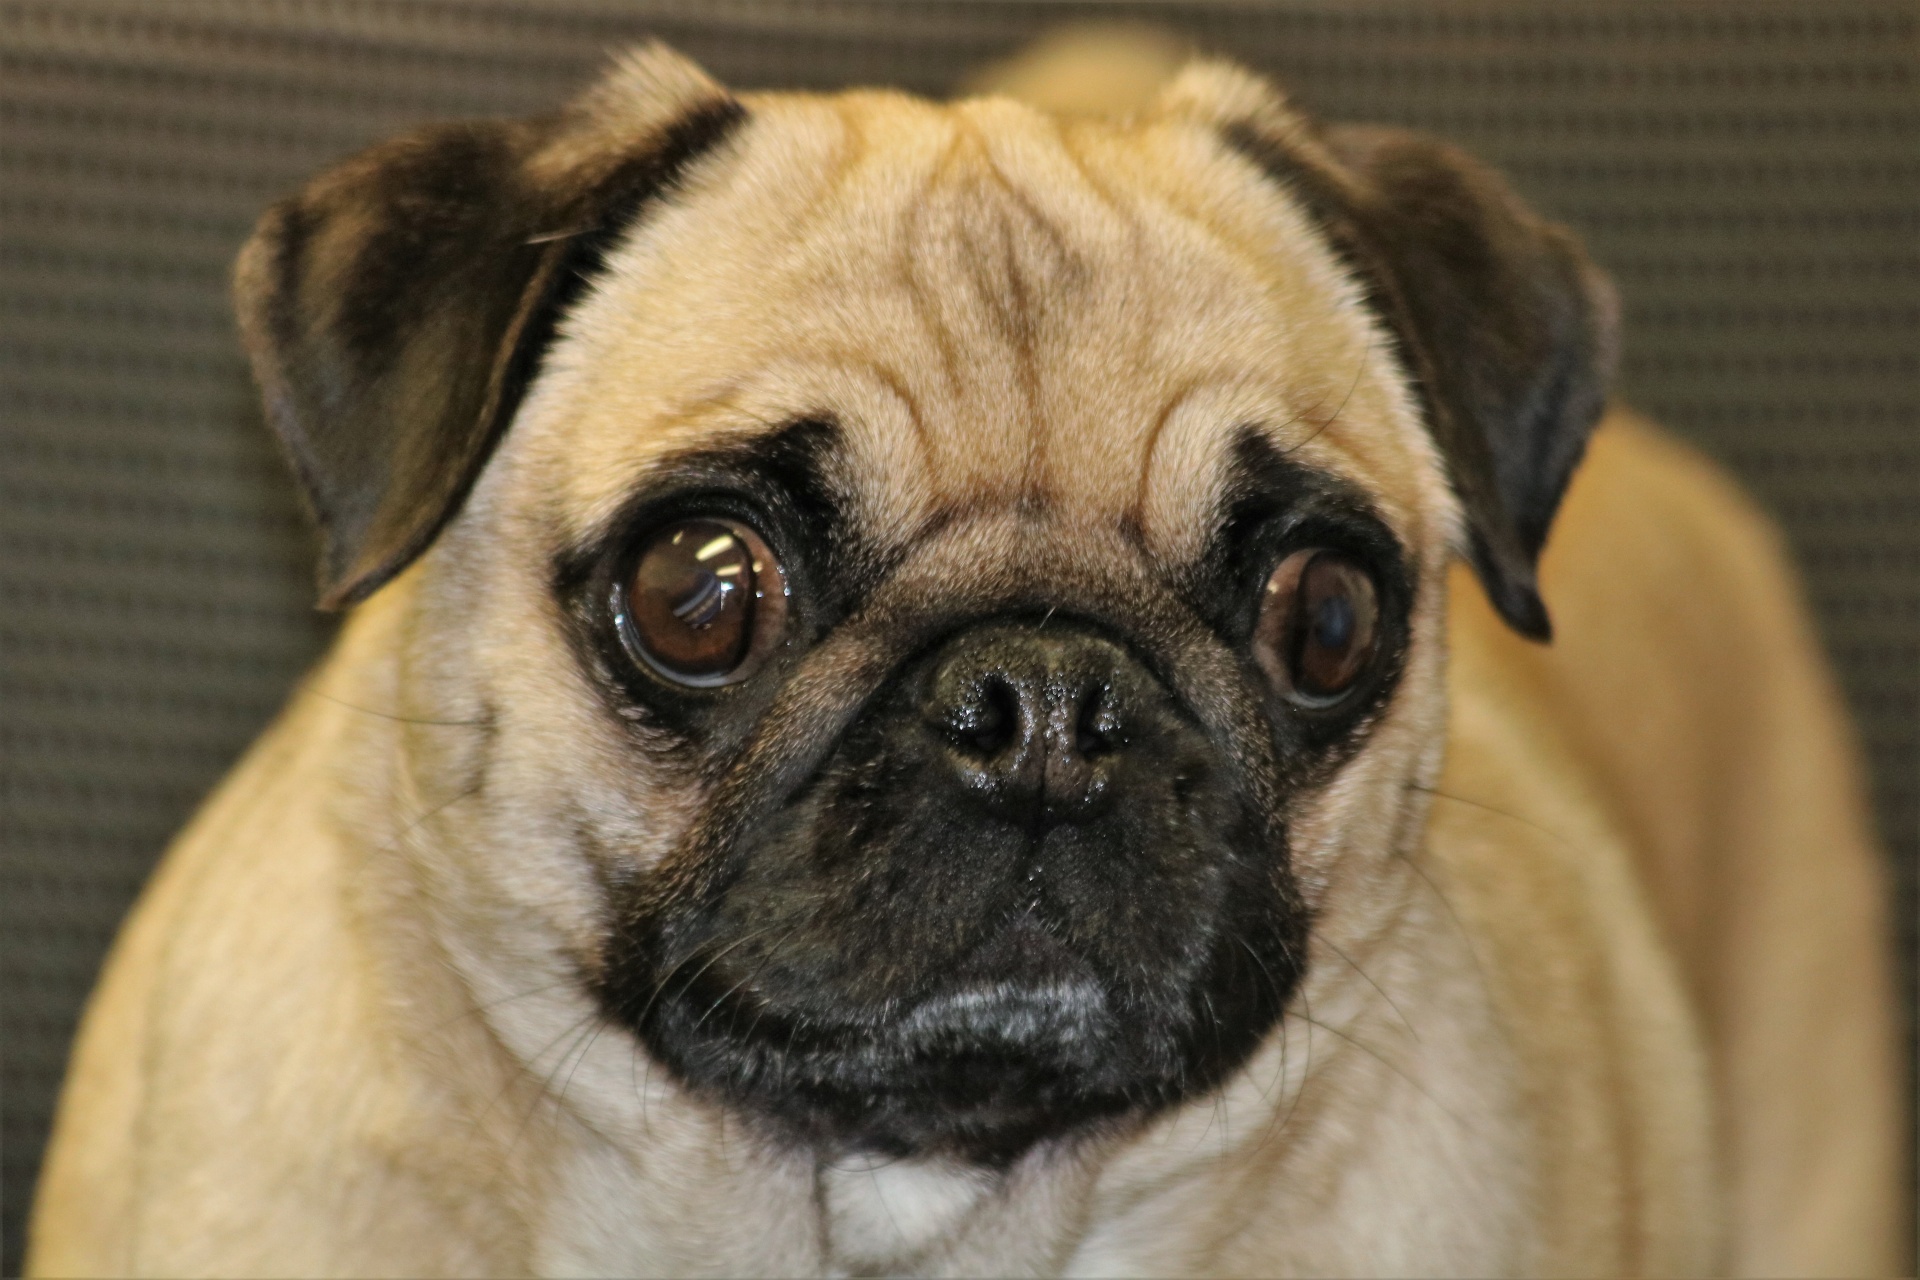 Close-up of the wrinkled face of a cute little pug dog, on a blurred dark background.